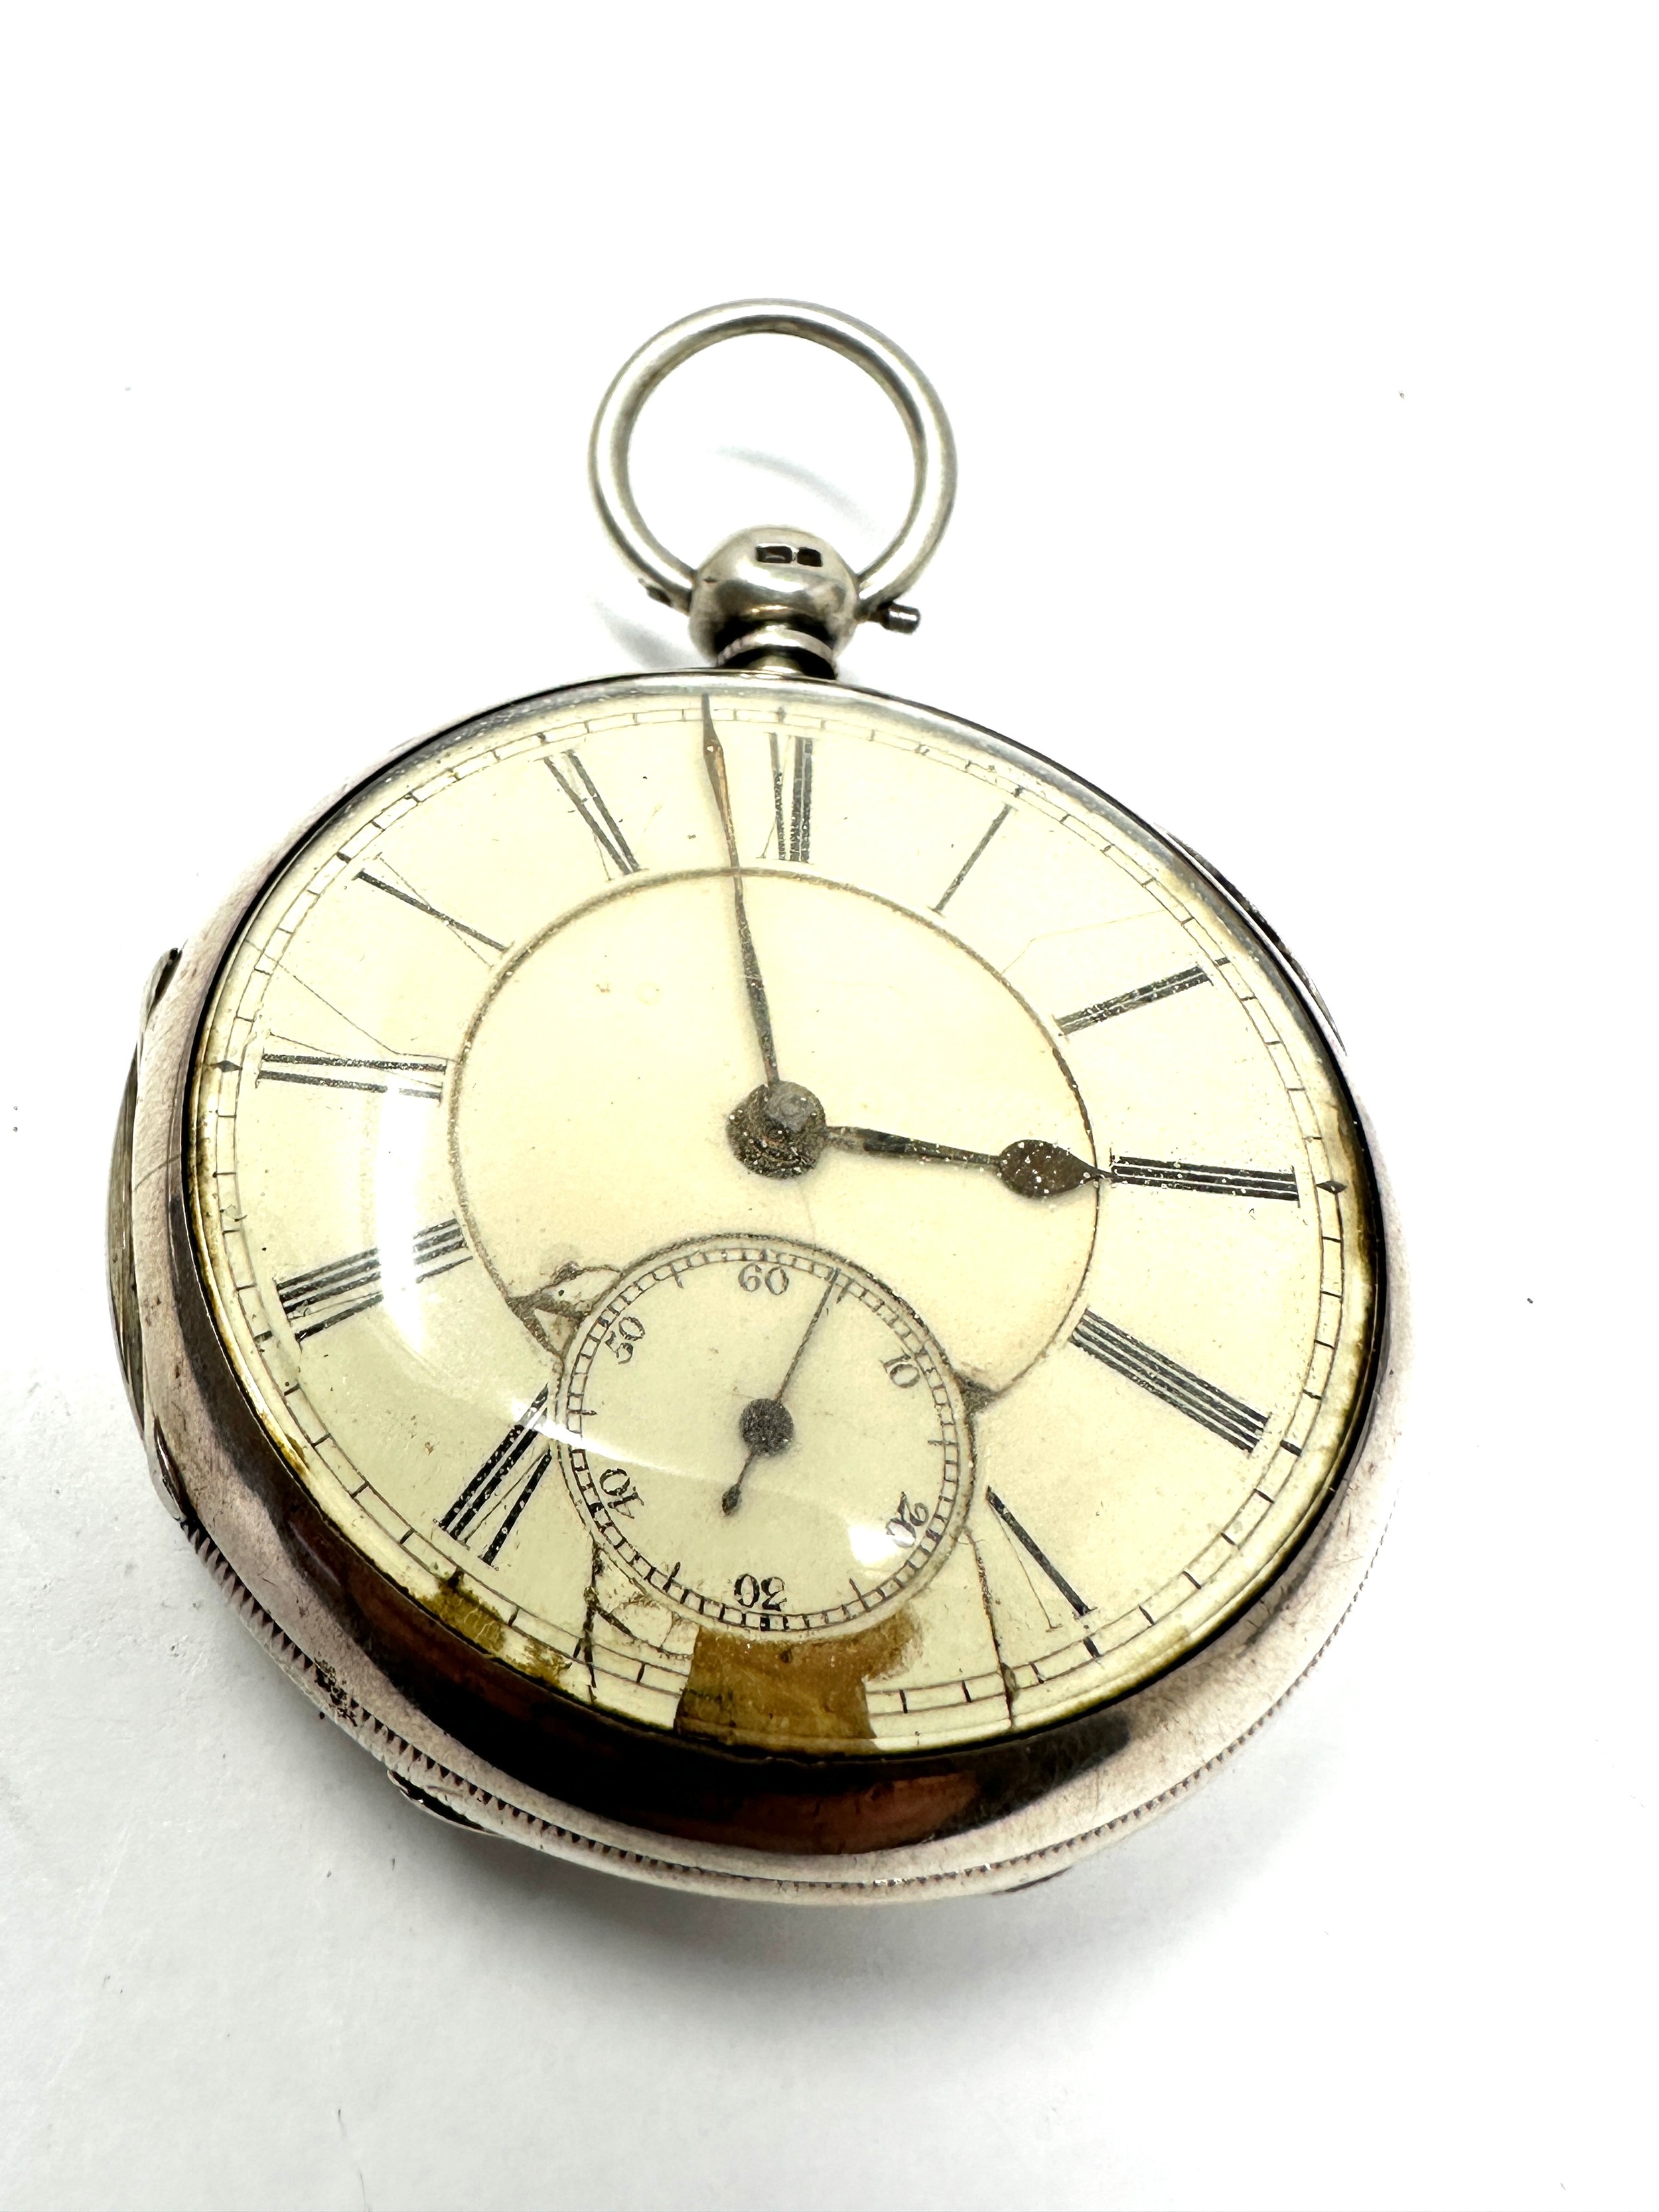 STERLING SILVER Cased Gents Antique Fusee POCKET WATCH Key-wind WORKING damage to dial